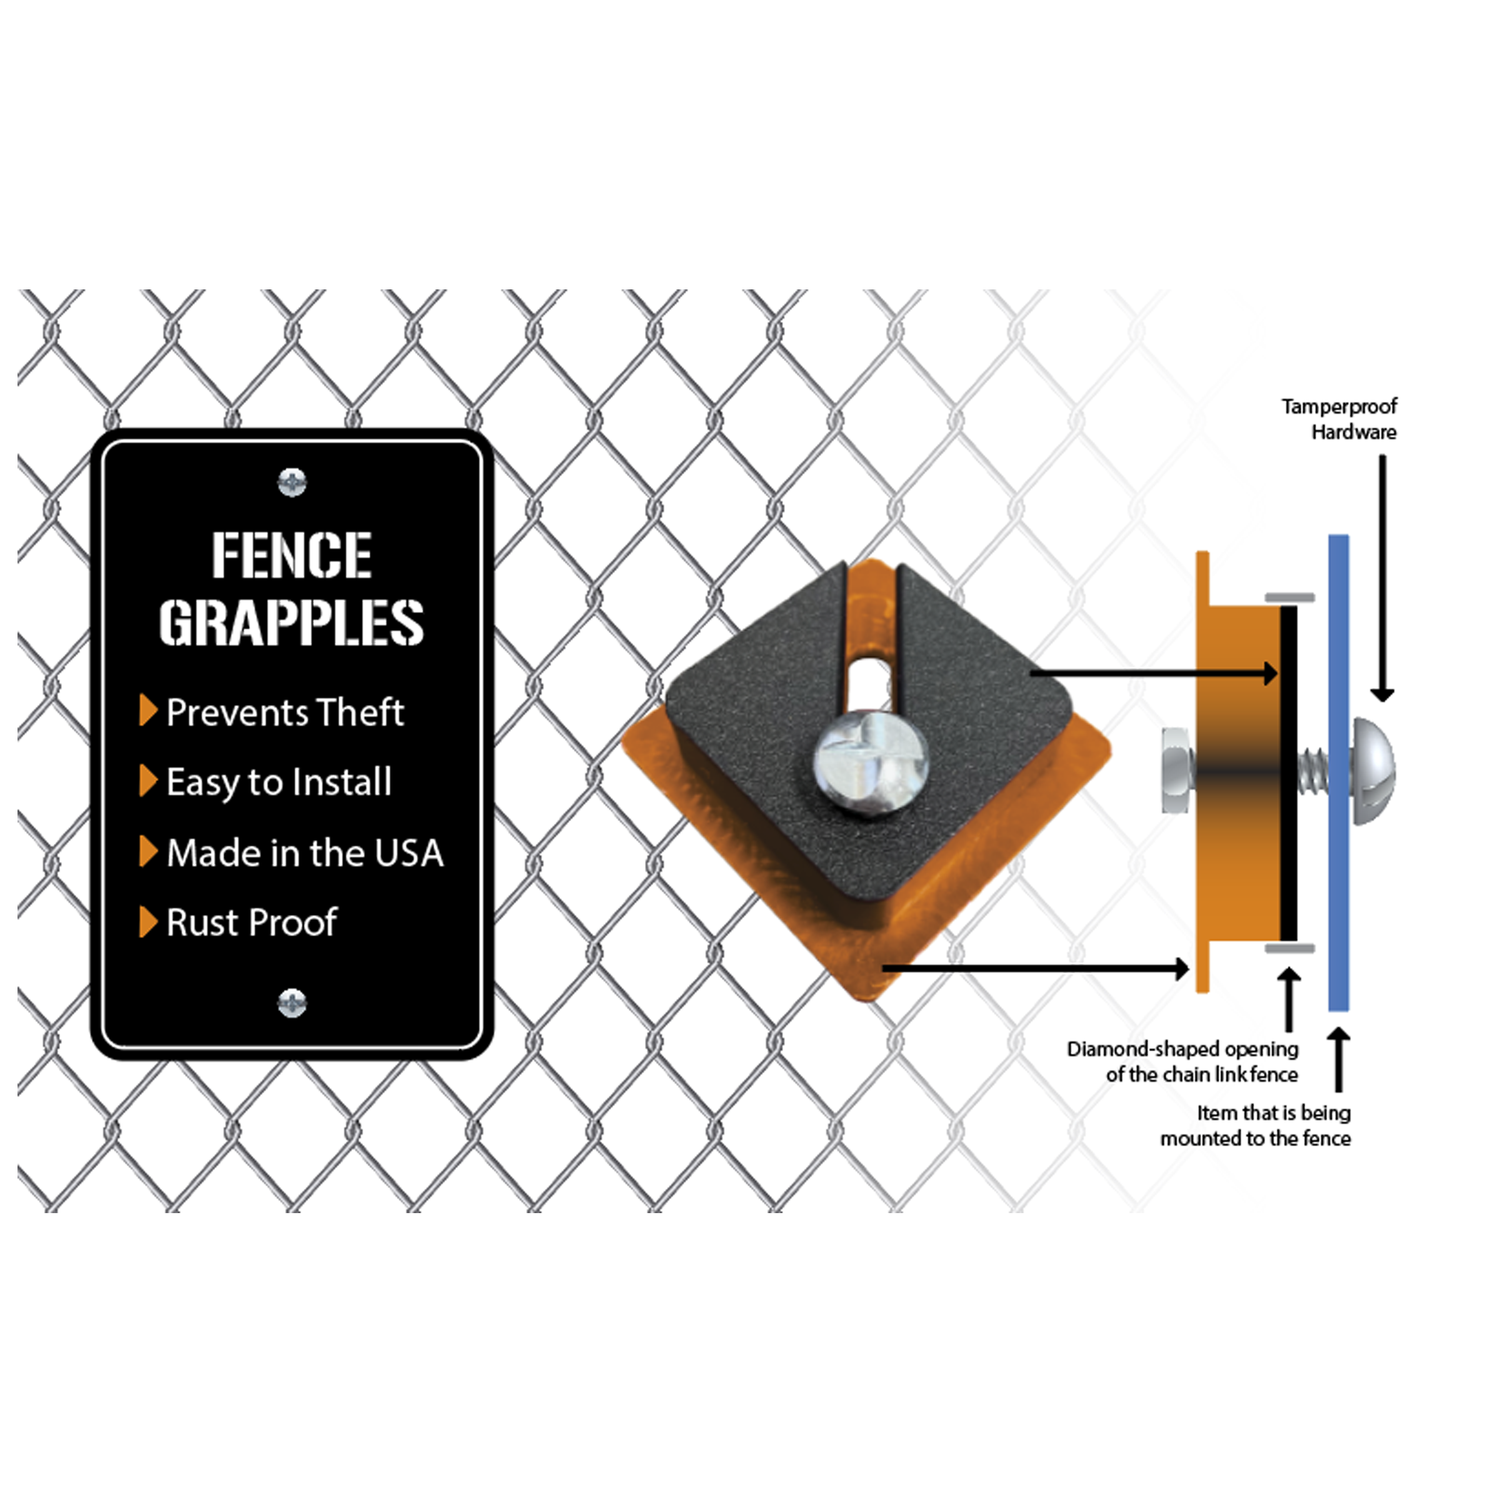 Fence Grapples